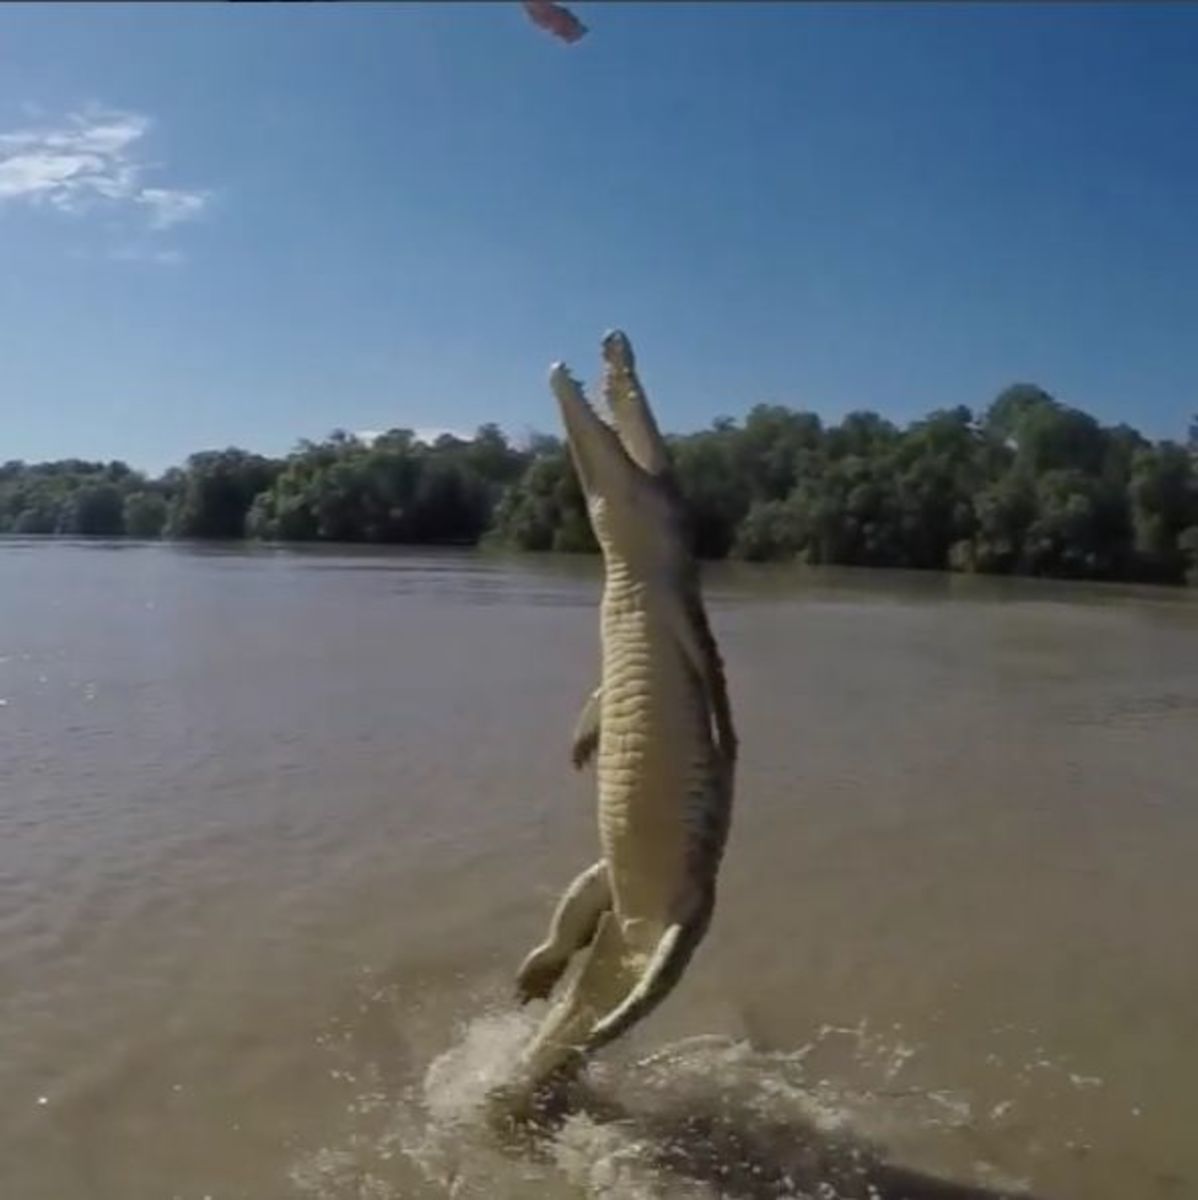 Crocodile launches completely out of the water, using its powerful tale. Photo: Trevor Frost, screen grab